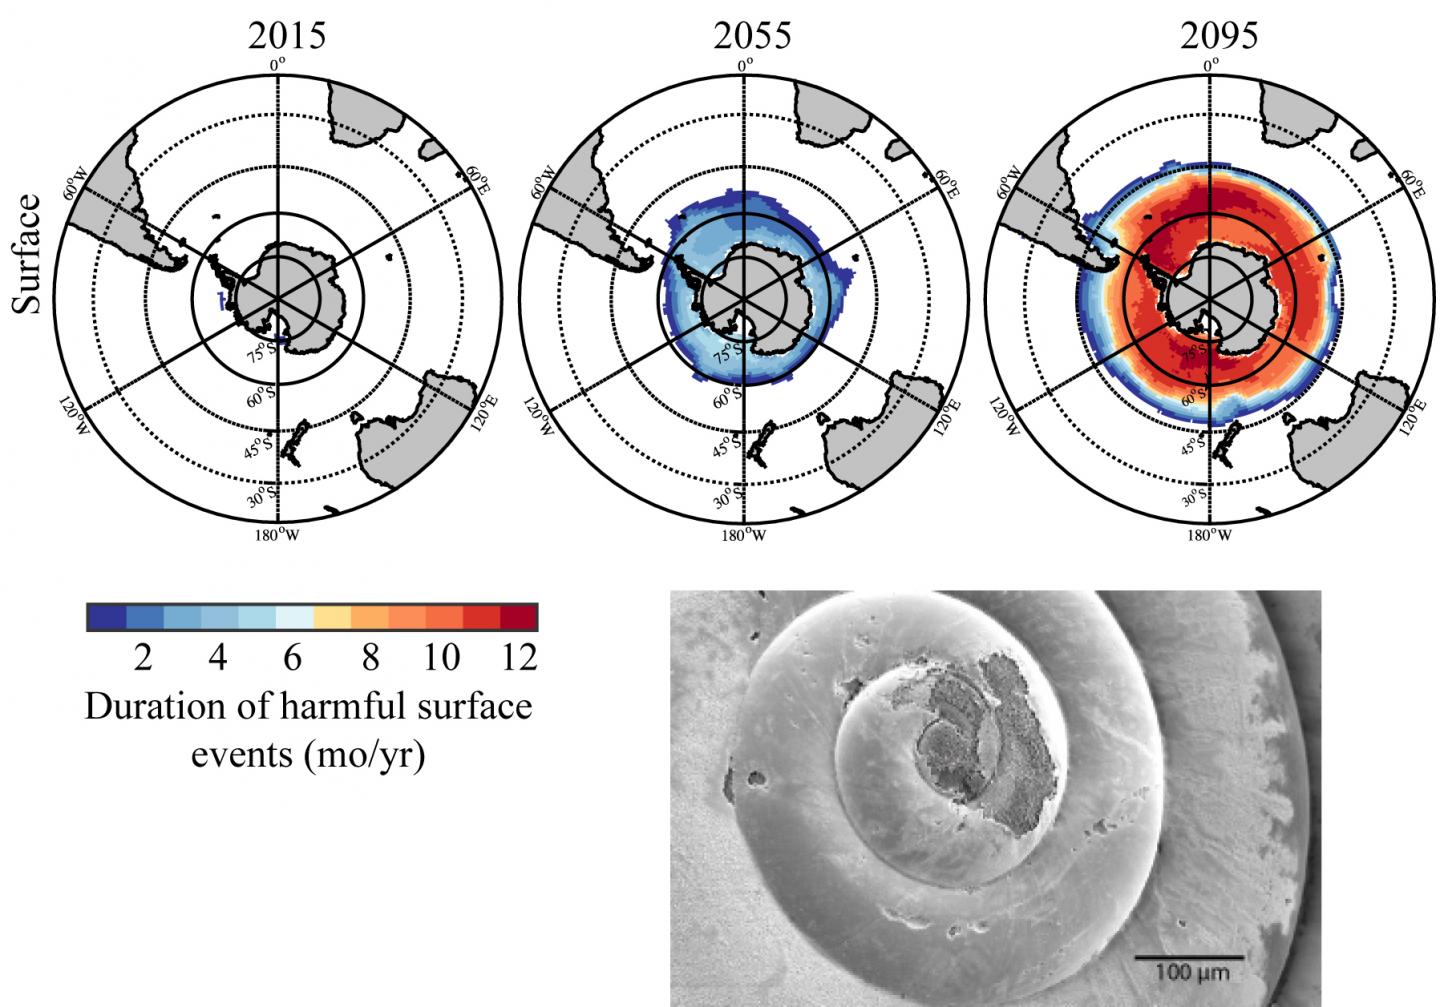 Duration of Harmful Surface Events in the Southern Ocean